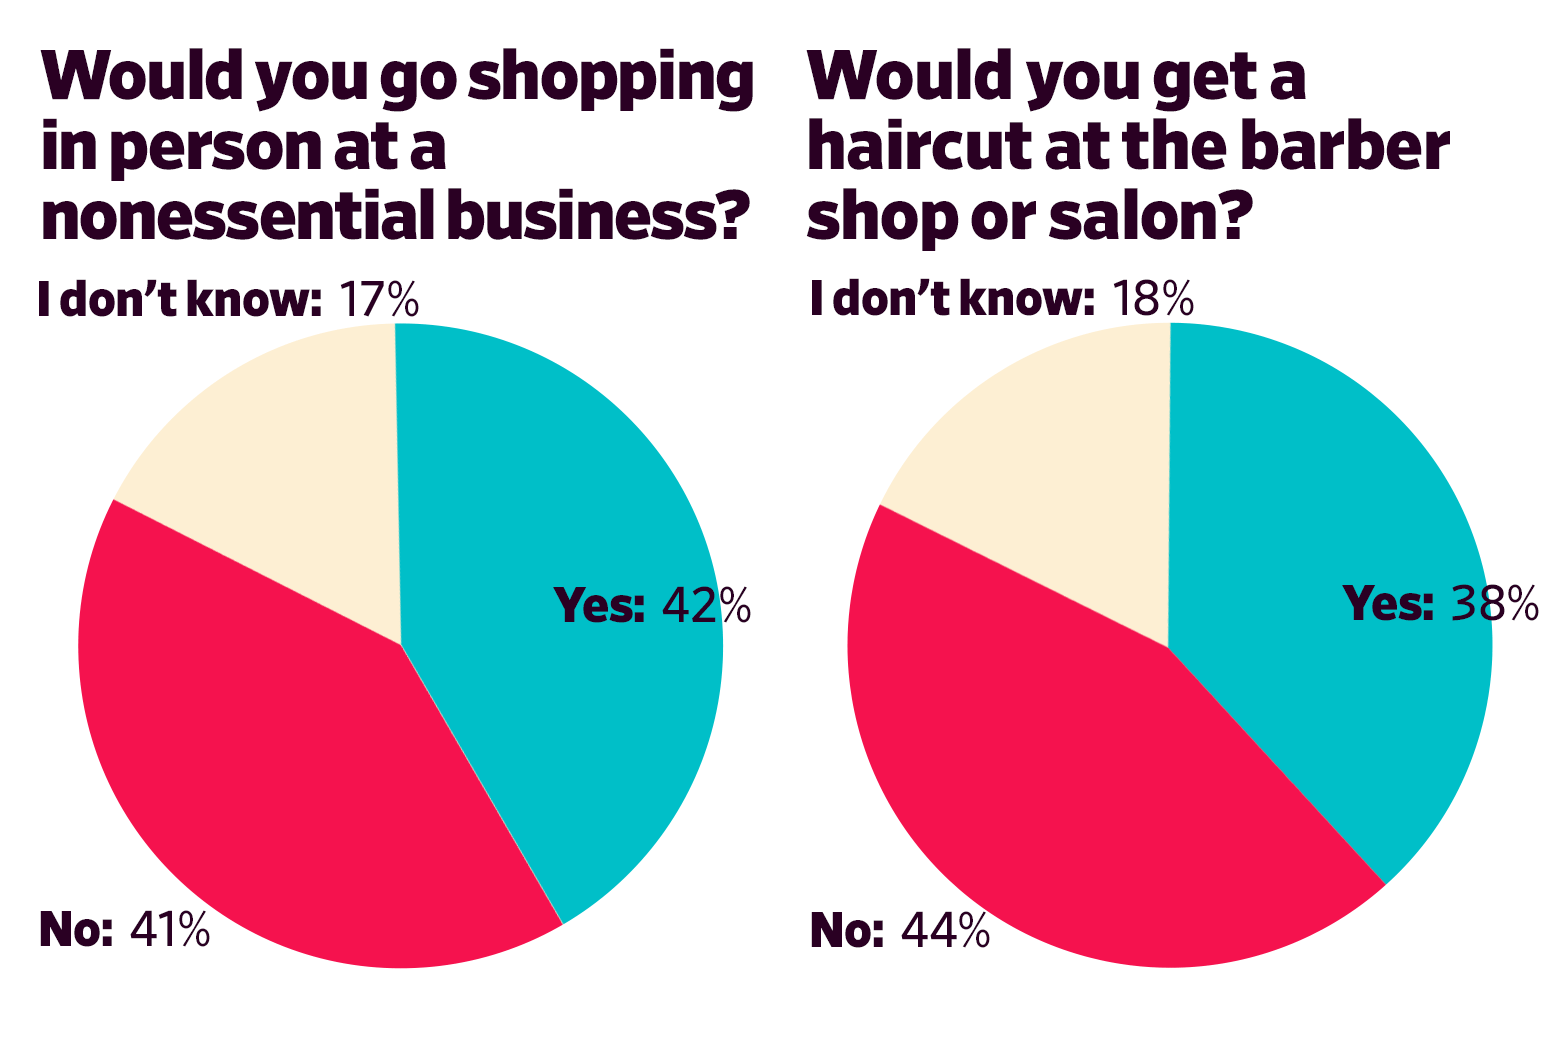 Would you go shopping in person at a nonessential business? Yes: 42 No: 41 I don’t know: 17  Would you get a haircut at the barber shop or salon? Yes: 38 No: 44 I don’t know: 18